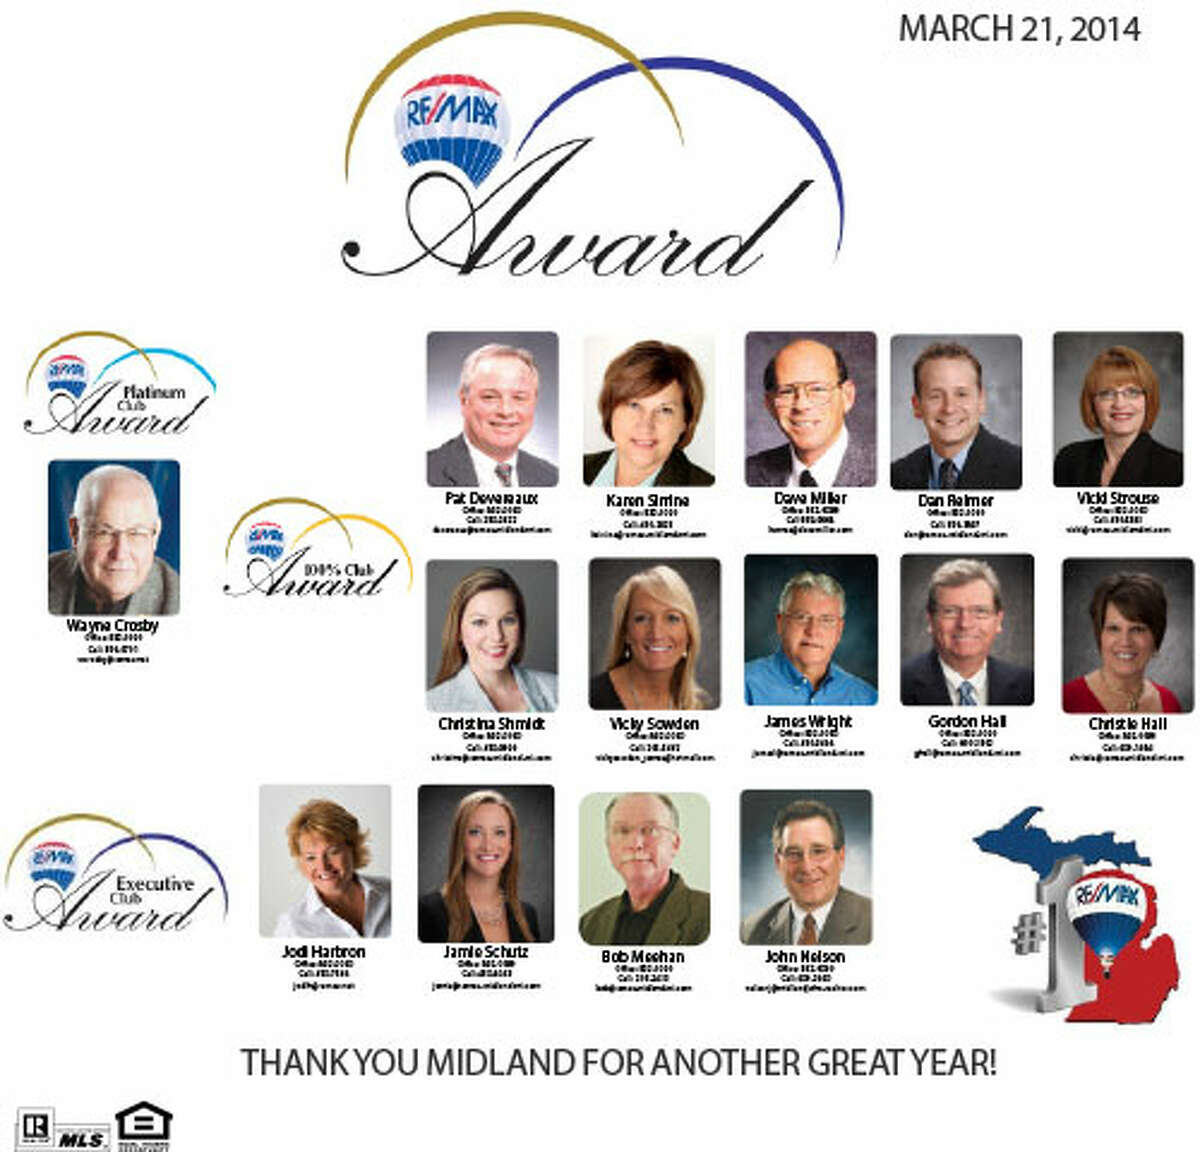 RE/MAX Of Midland - March 20th 2014